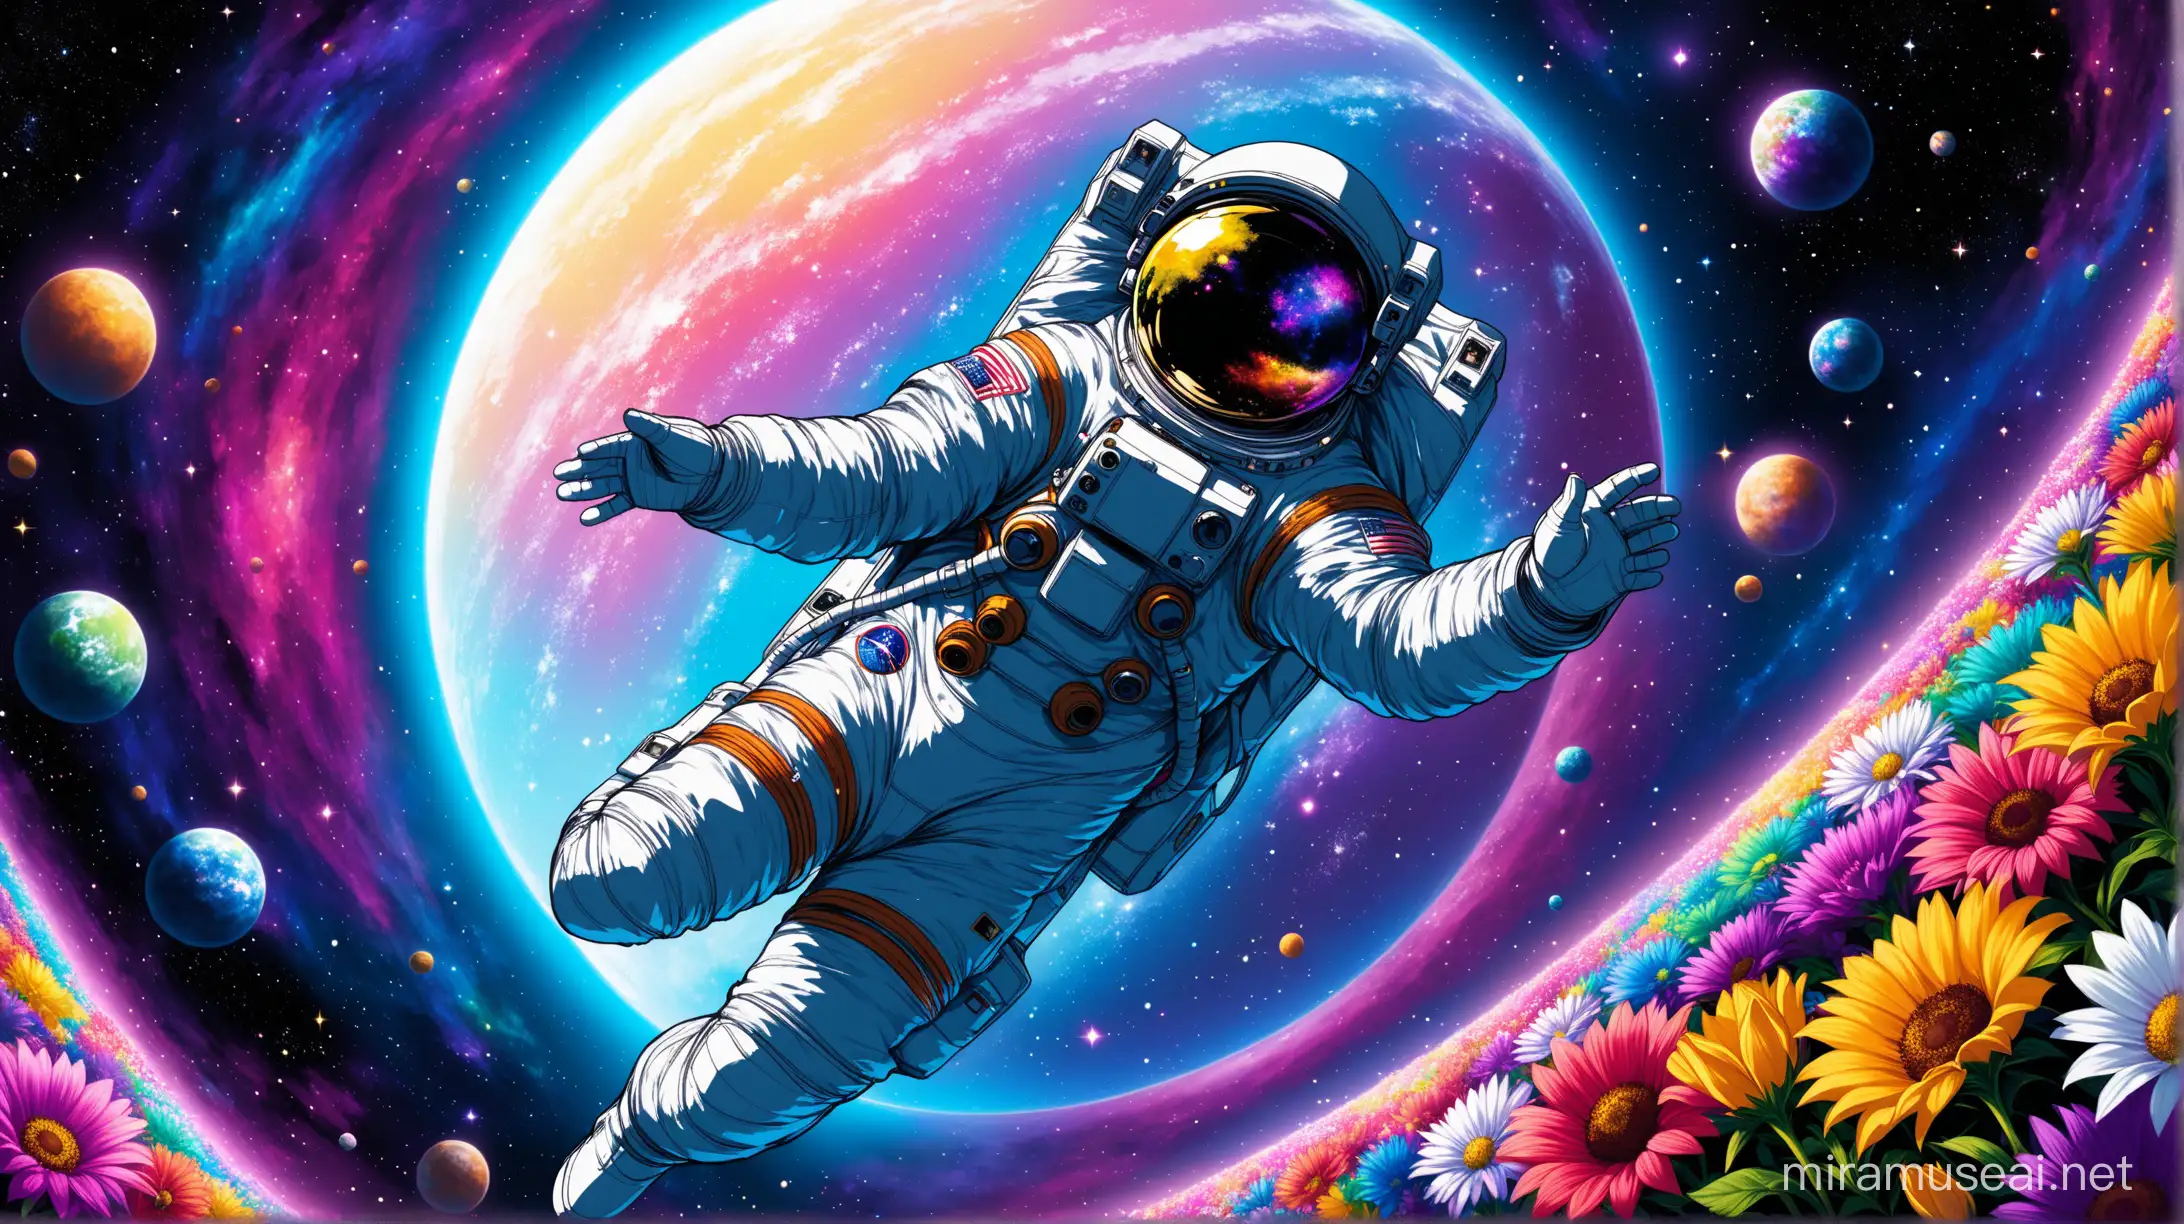 Astronaut in Colorful Space Odyssey Surrounded by Cosmic Flora